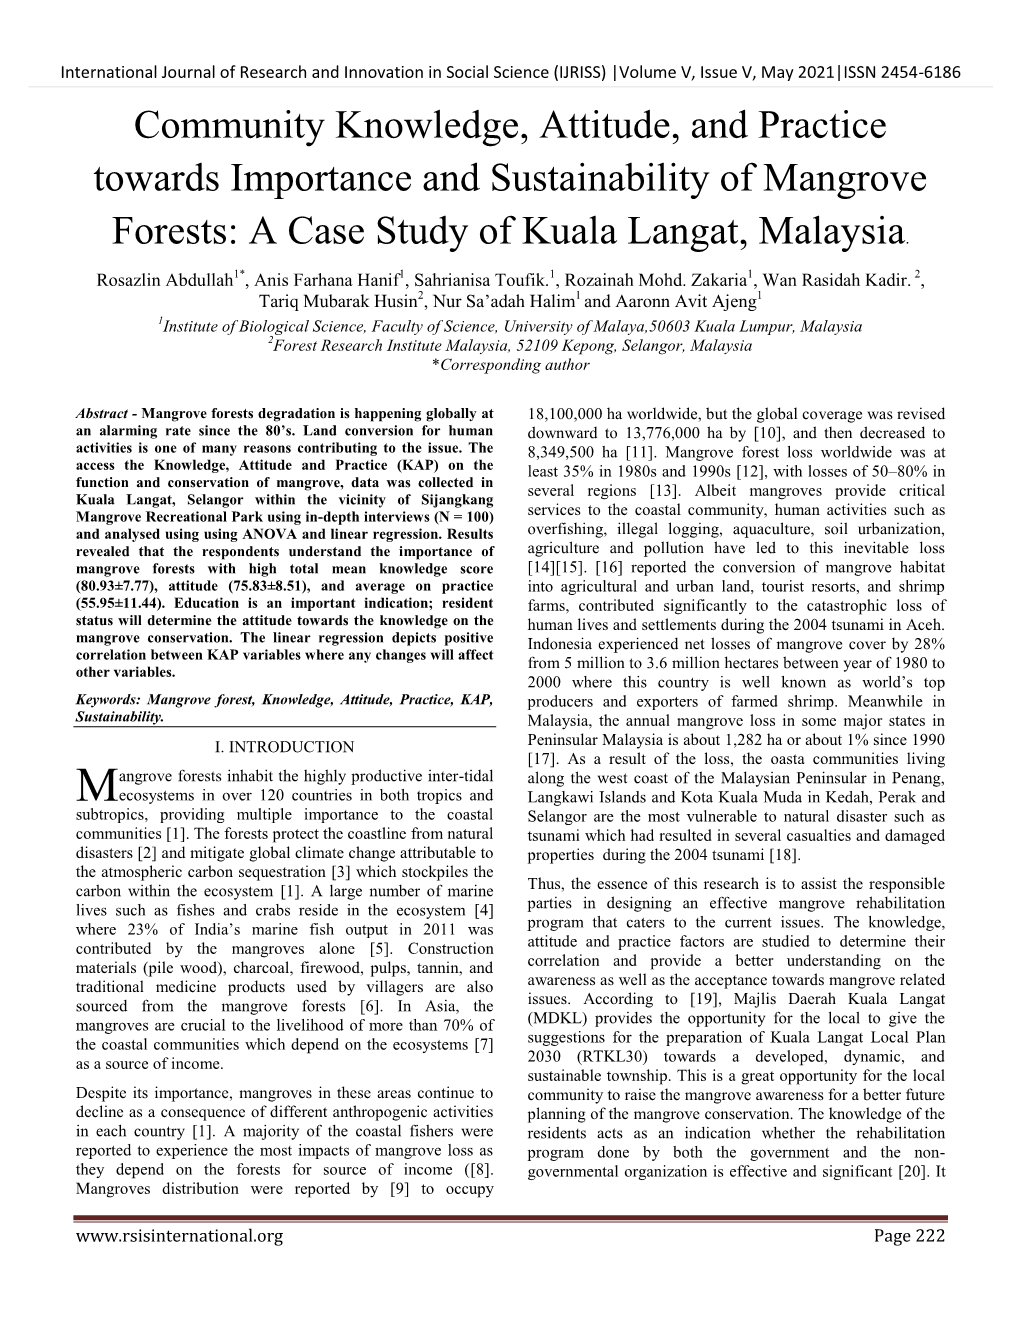 Community Knowledge, Attitude, and Practice Towards Importance and Sustainability of Mangrove